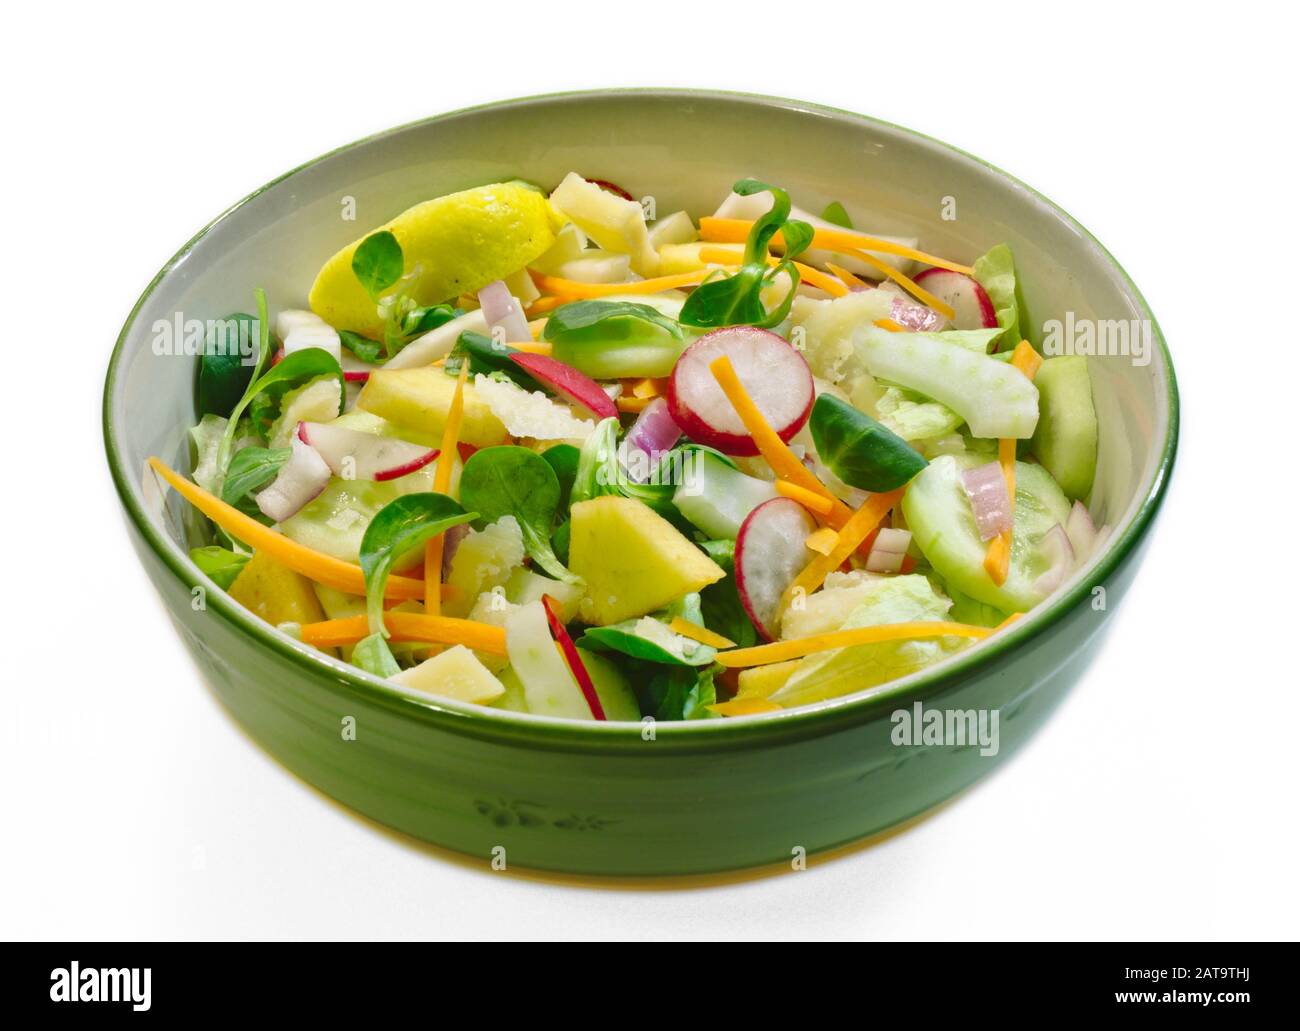 Close-up of vegetable salad in a green bowl on a white background Stock Photo